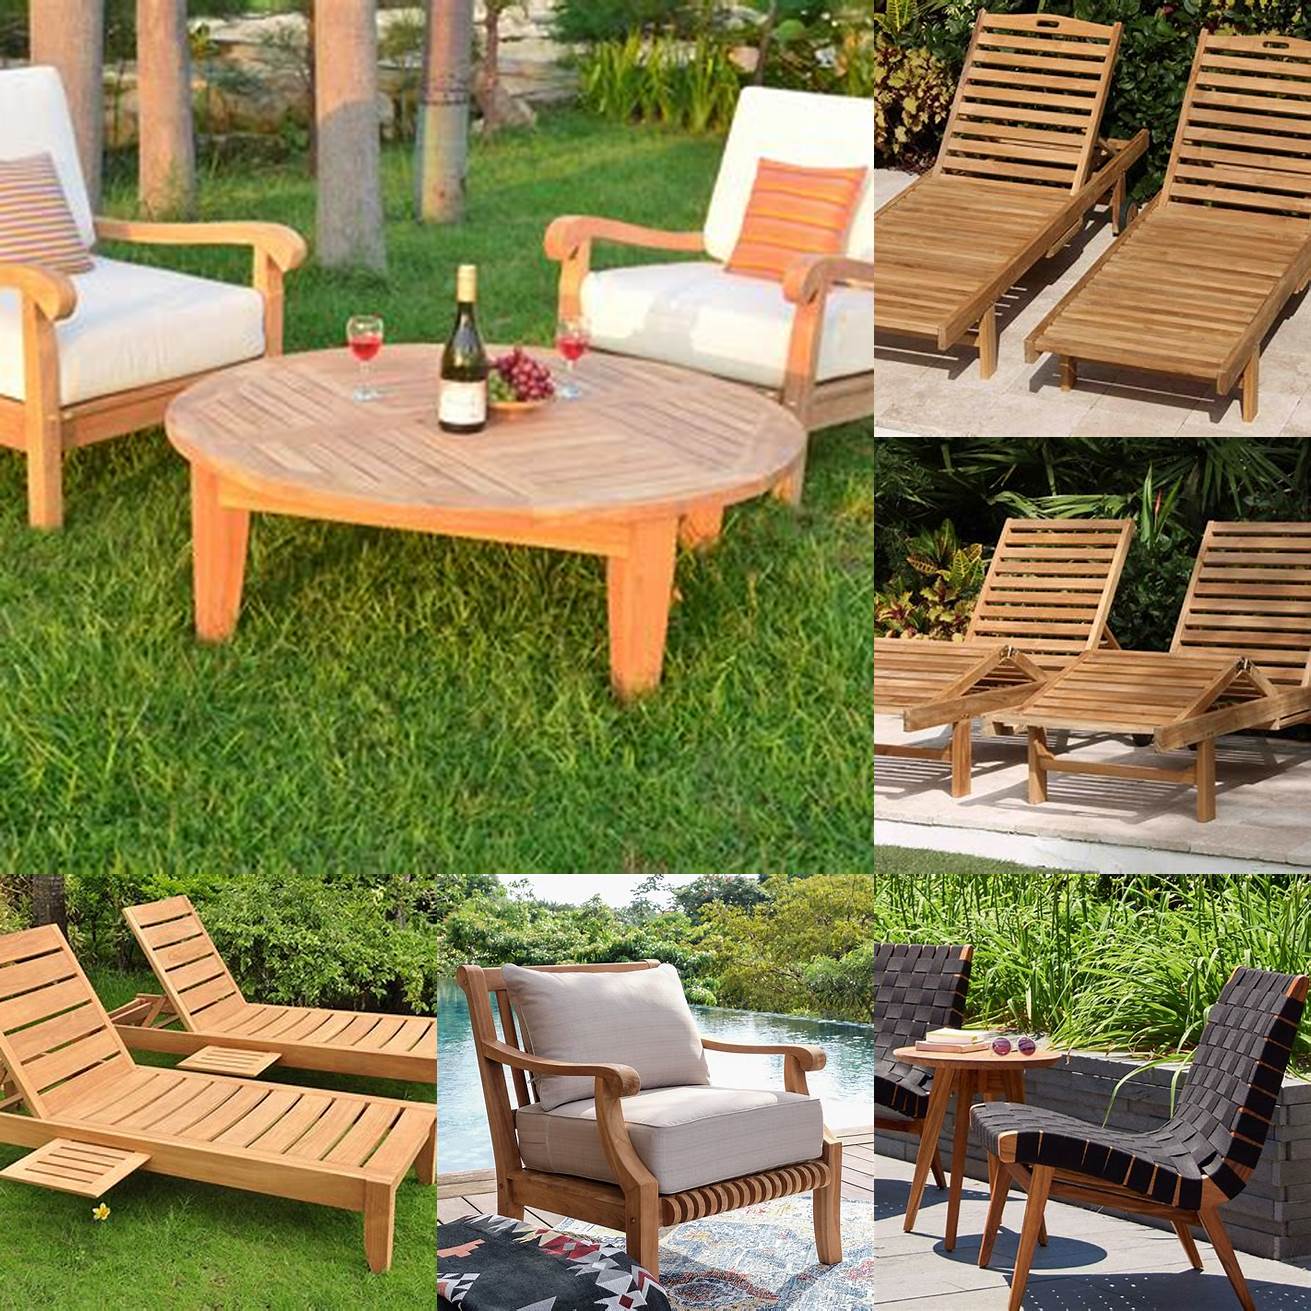 Teak lounge chairs and table